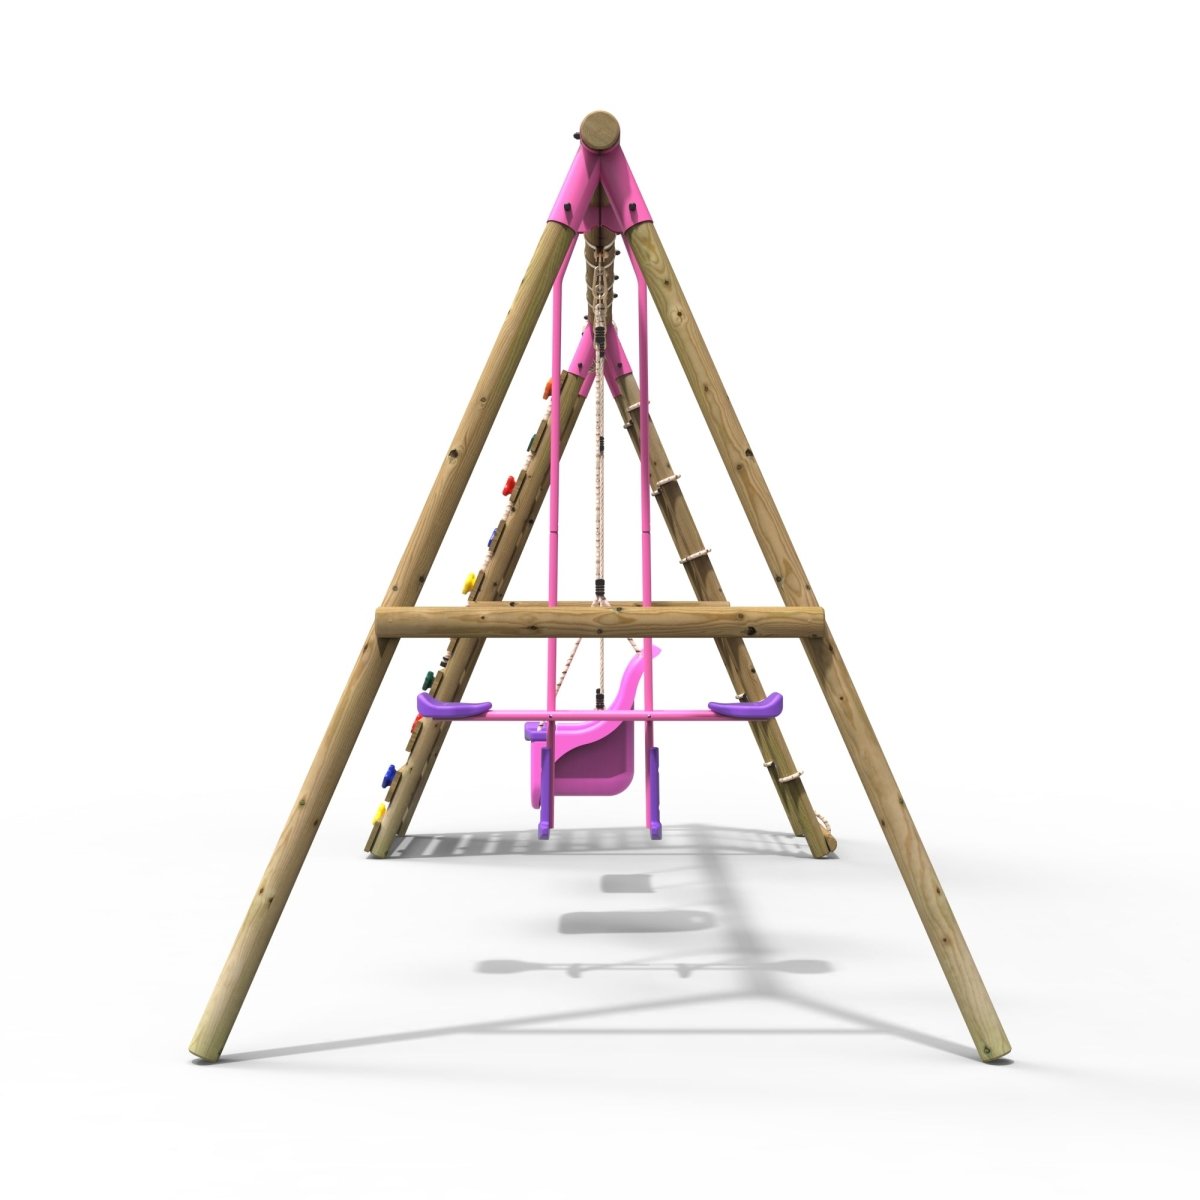 Rebo Wooden Swing Set with Up and Over Climbing Wall - Sienna Pink